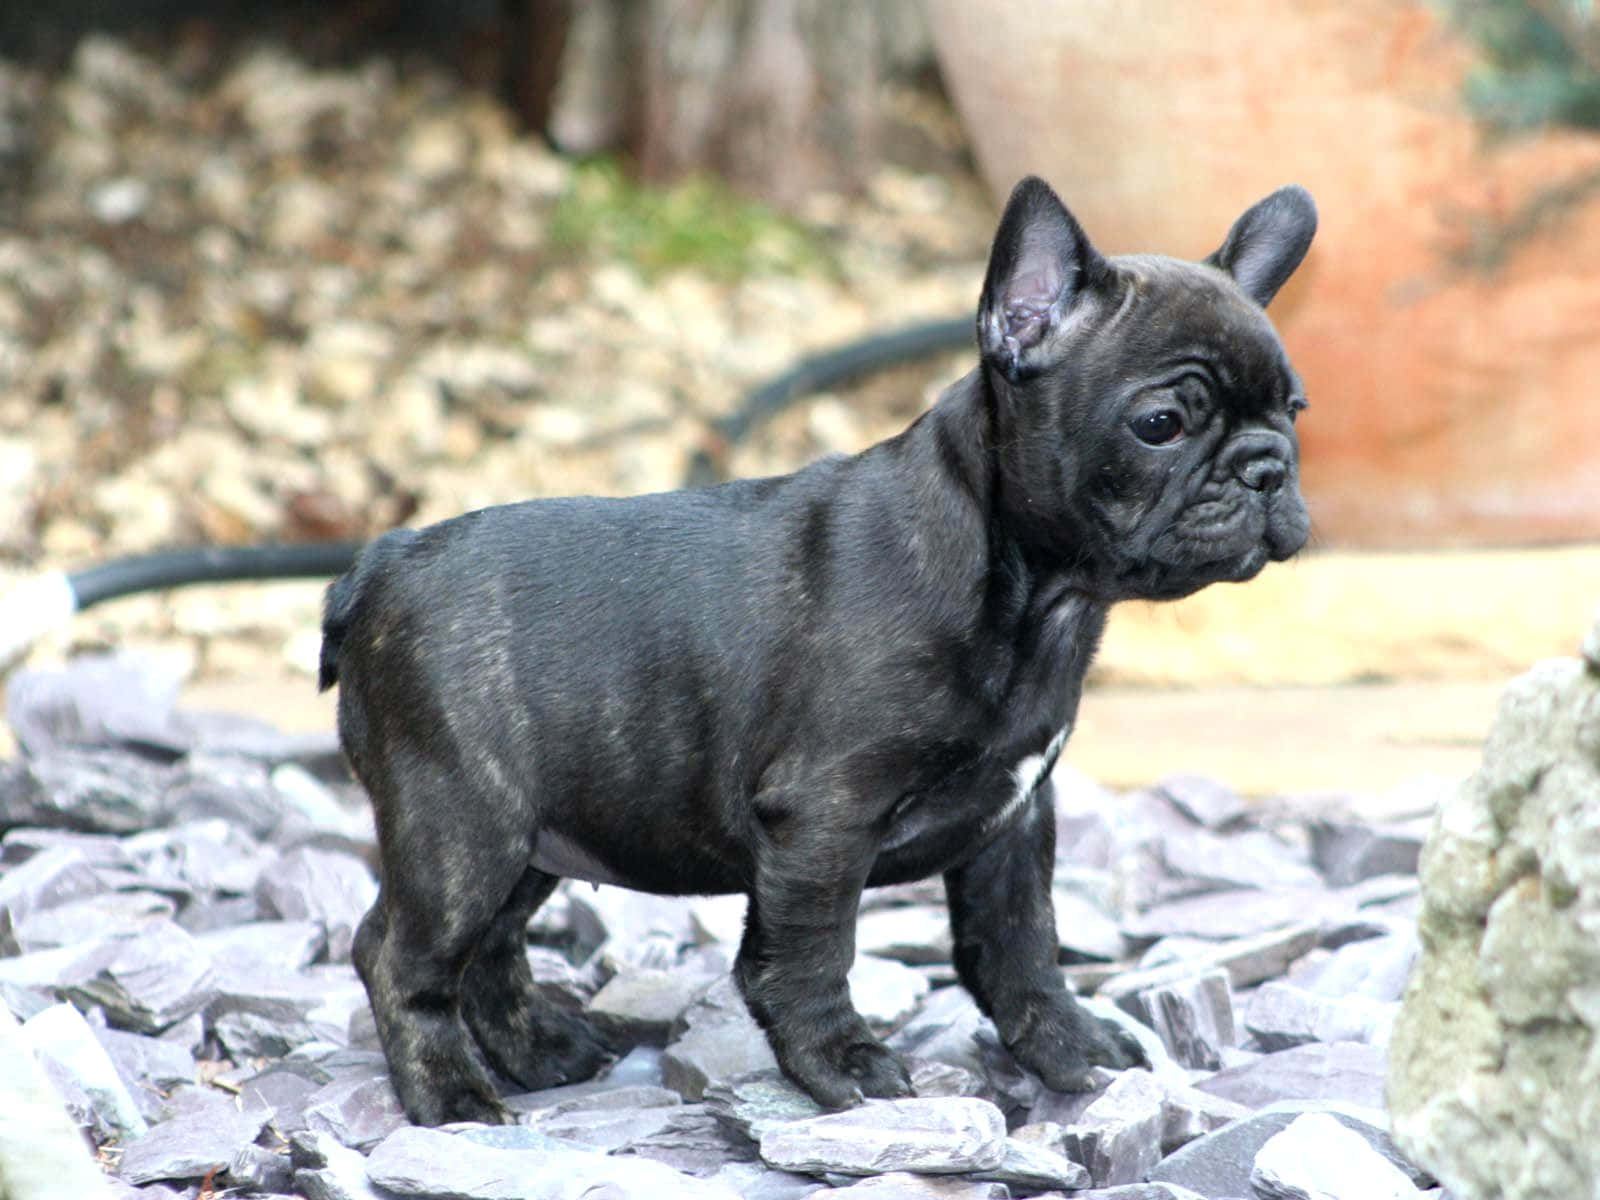 This French Bulldog is ready to brighten your day!